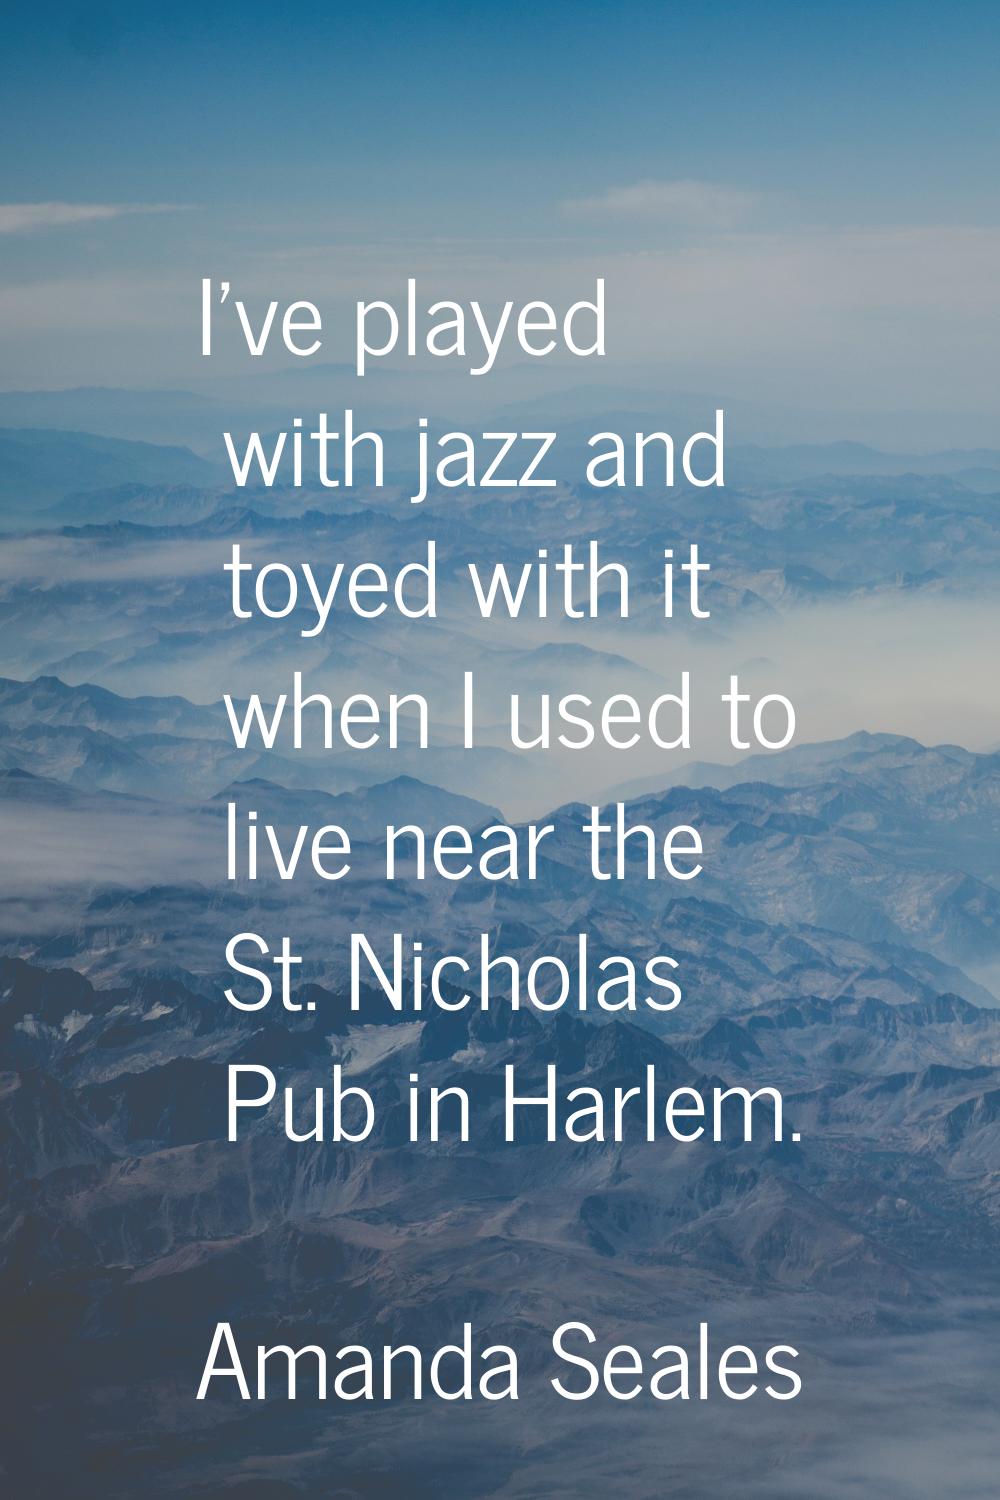 I've played with jazz and toyed with it when I used to live near the St. Nicholas Pub in Harlem.